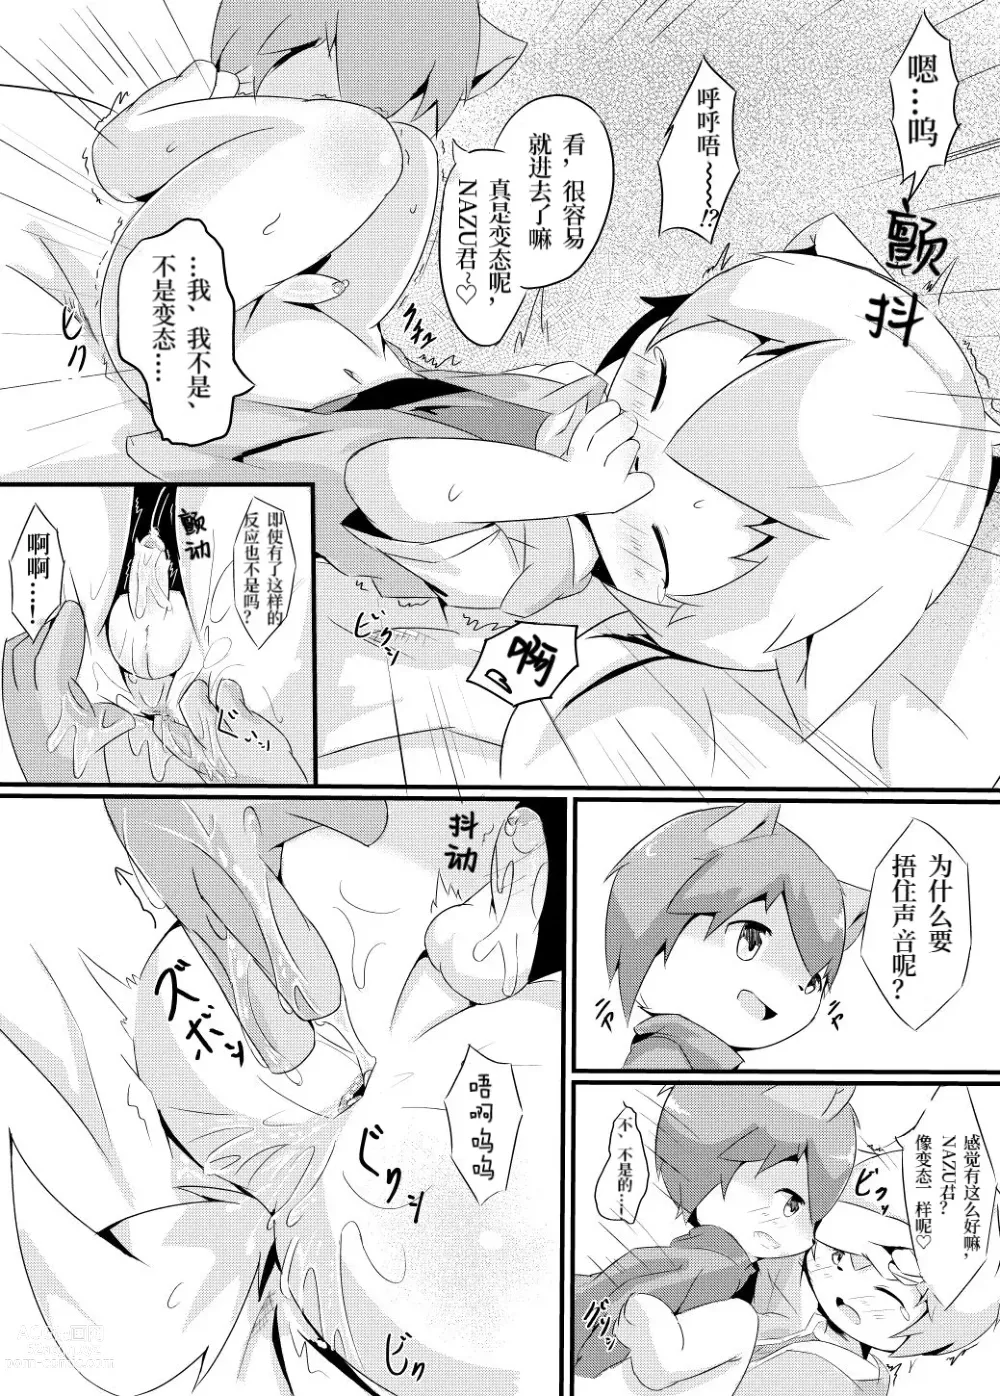 Page 10 of doujinshi 过夜 +extras